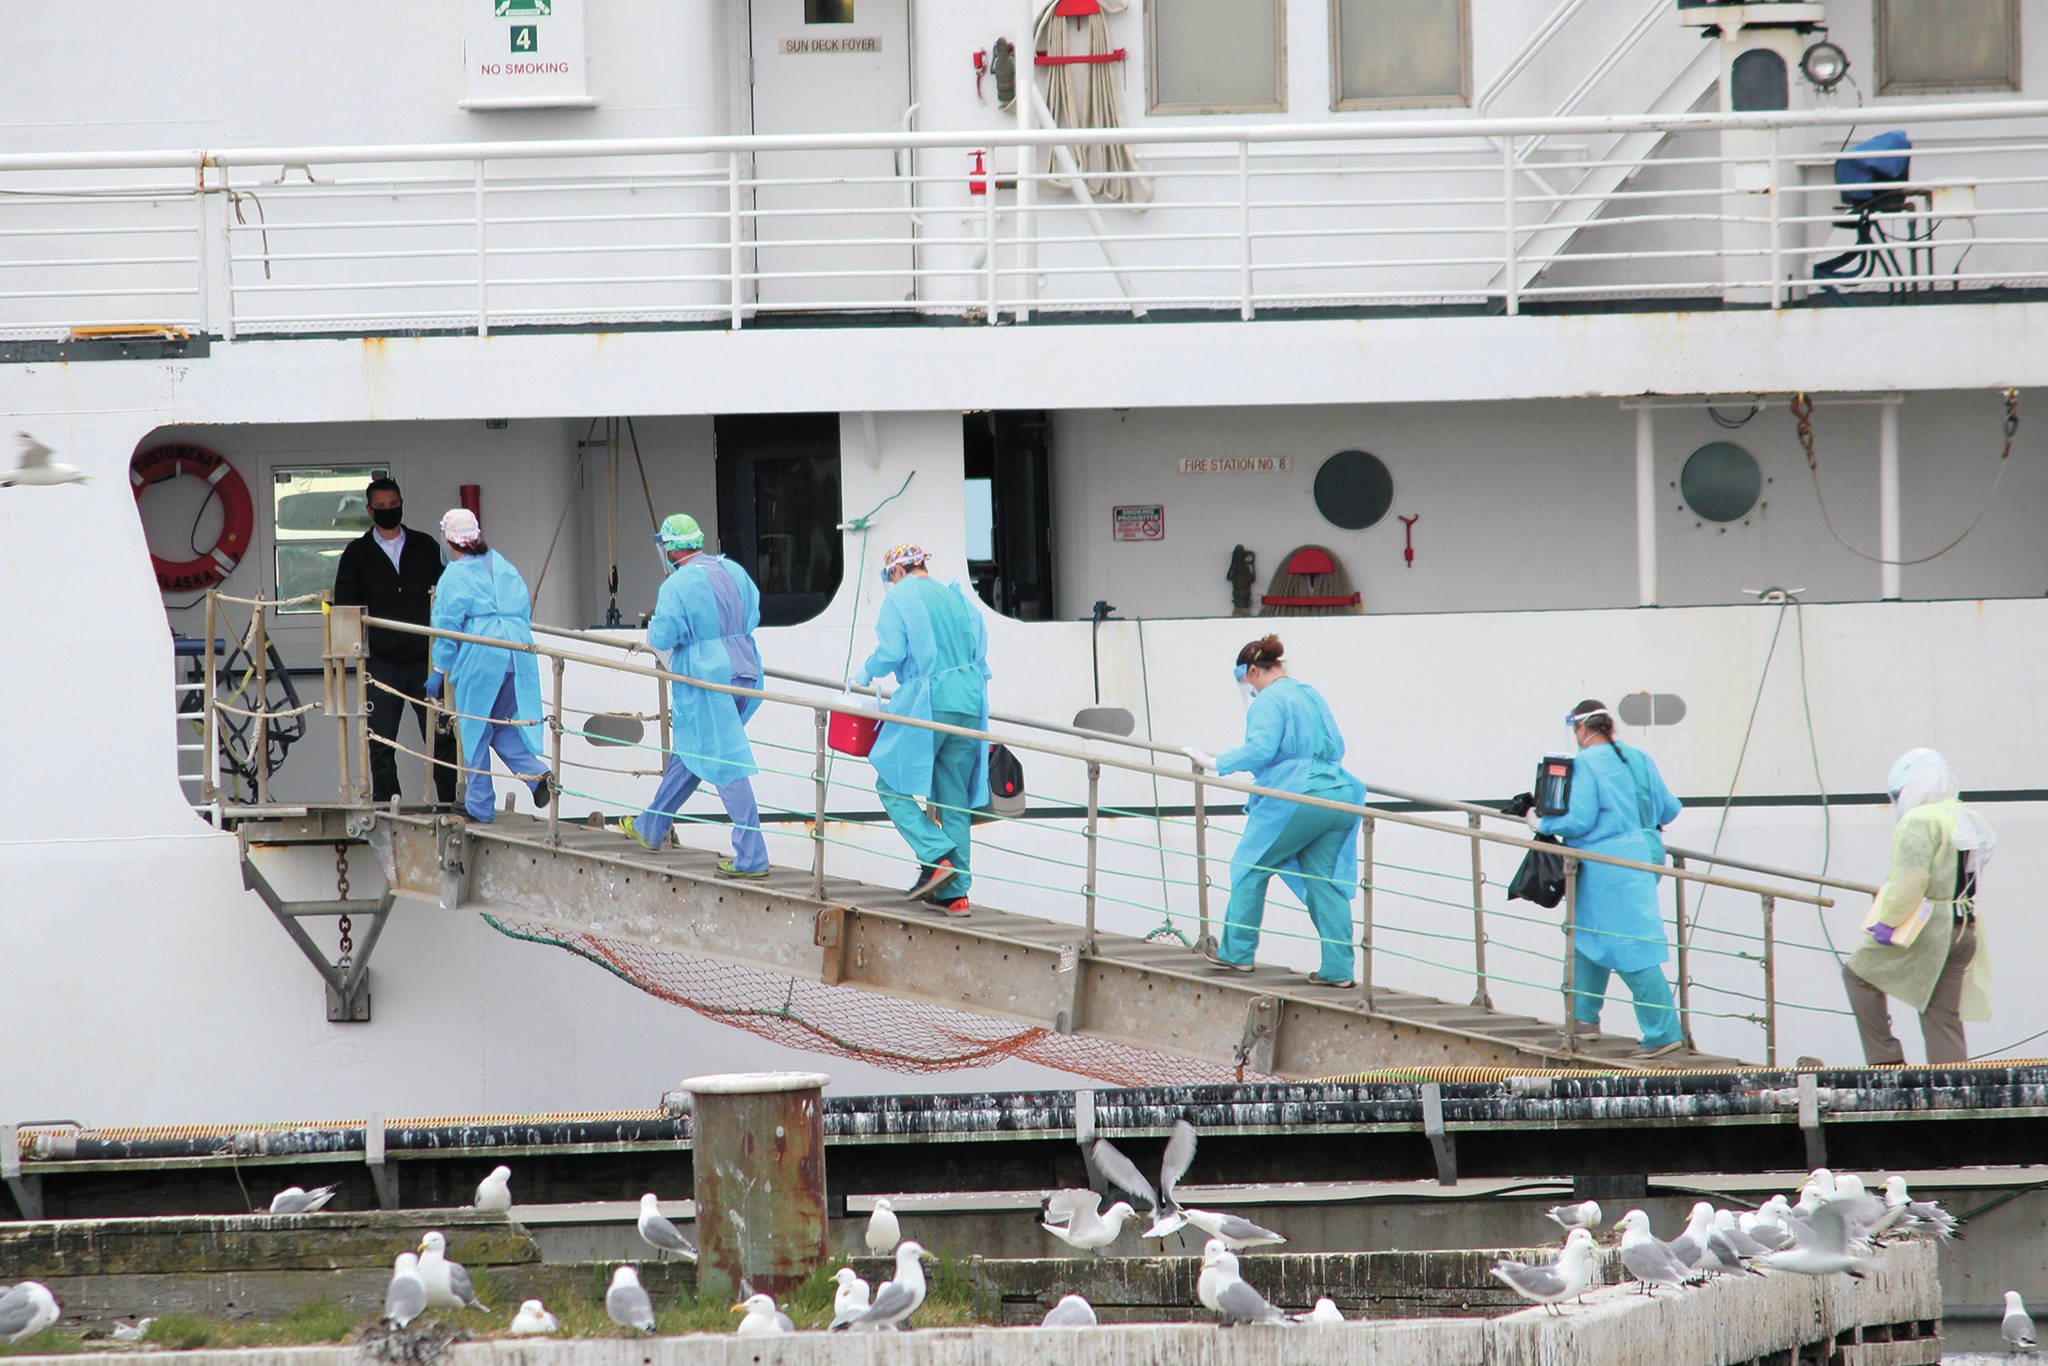 Staff from South Peninsula Hospital and Homer Public Health board the M/V Tustumena to test 35 crew members and six passengers Monday, June 8, 2020 at the Homer Ferry Terminal in Homer, Alaska. (Photo by Megan Pacer/Homer News)